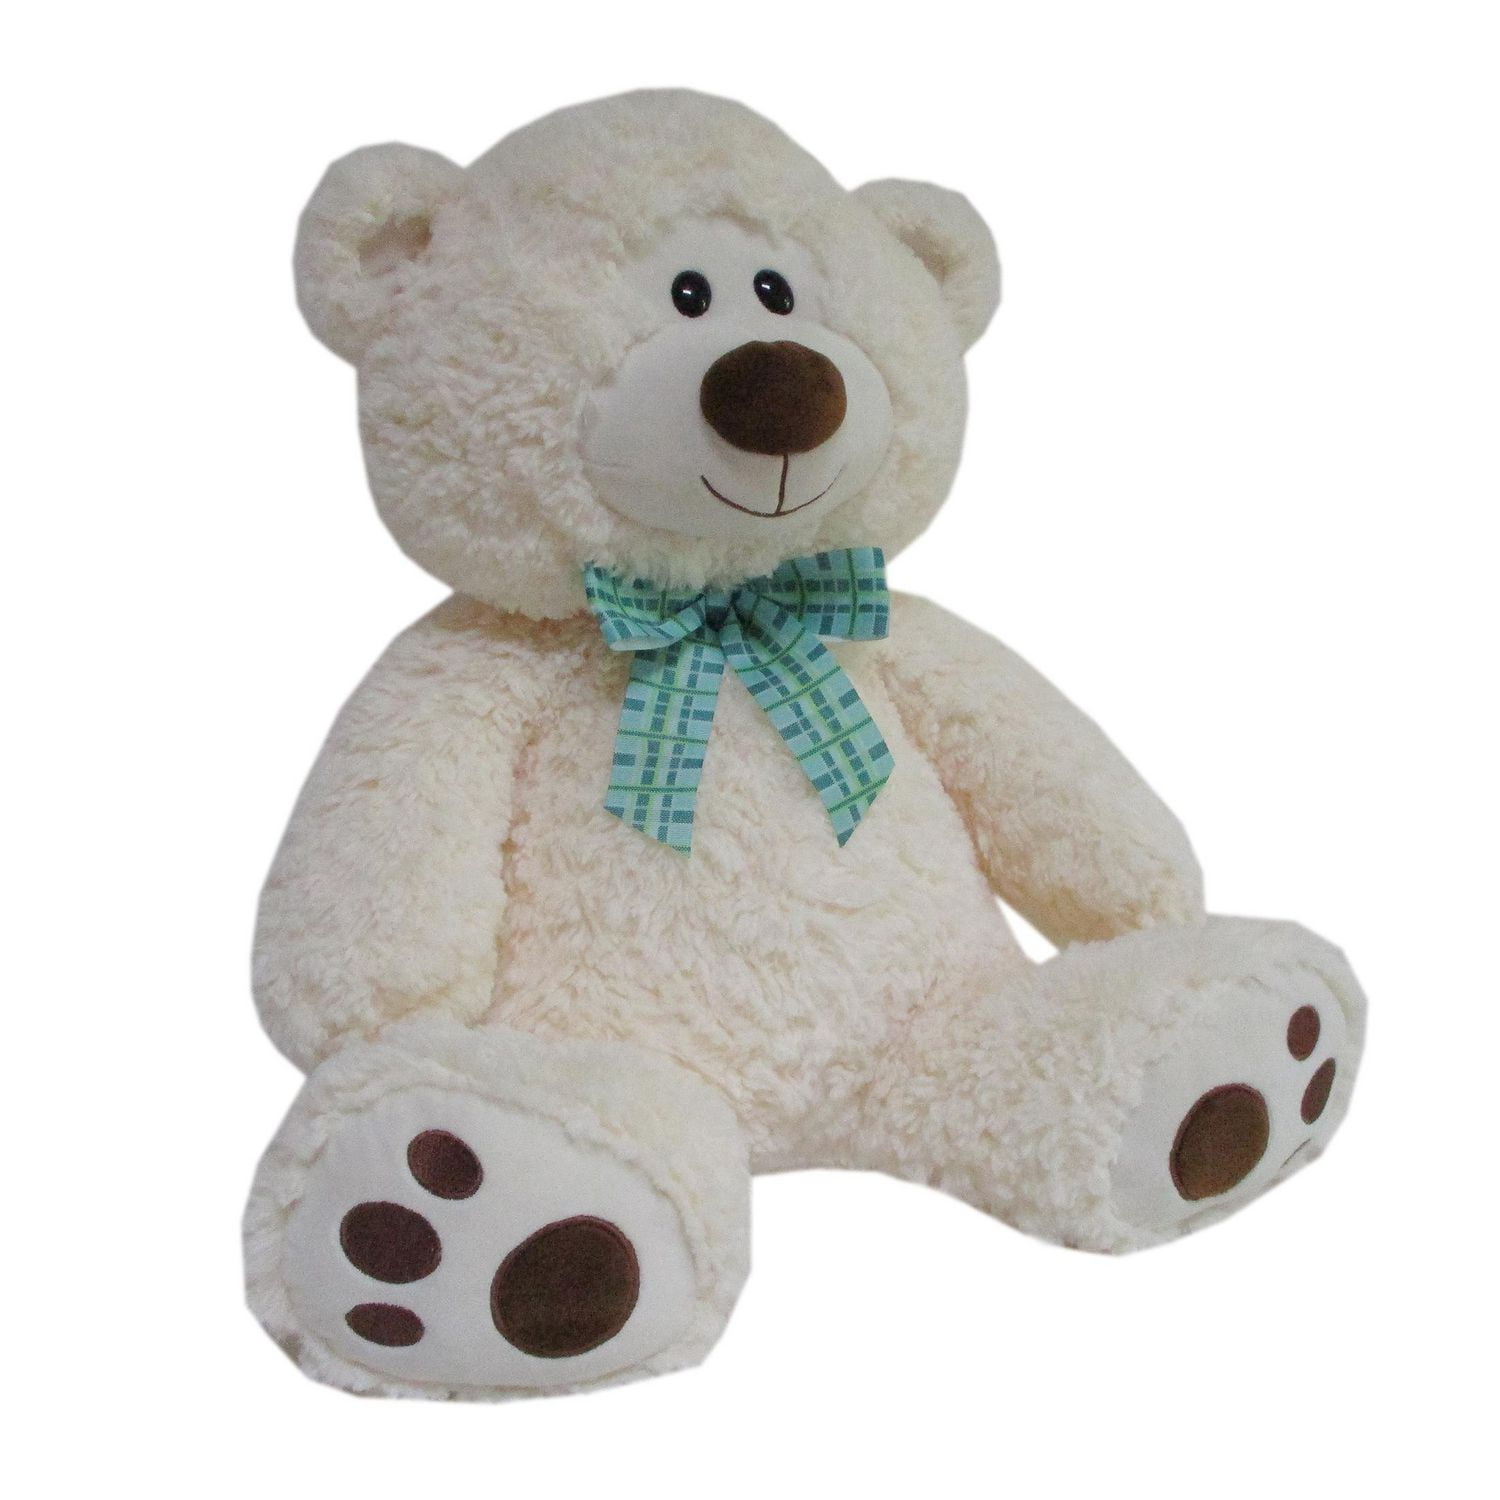 Kid Connection Holiday Teddy, 18 Plush Teddy, ages 3+ 